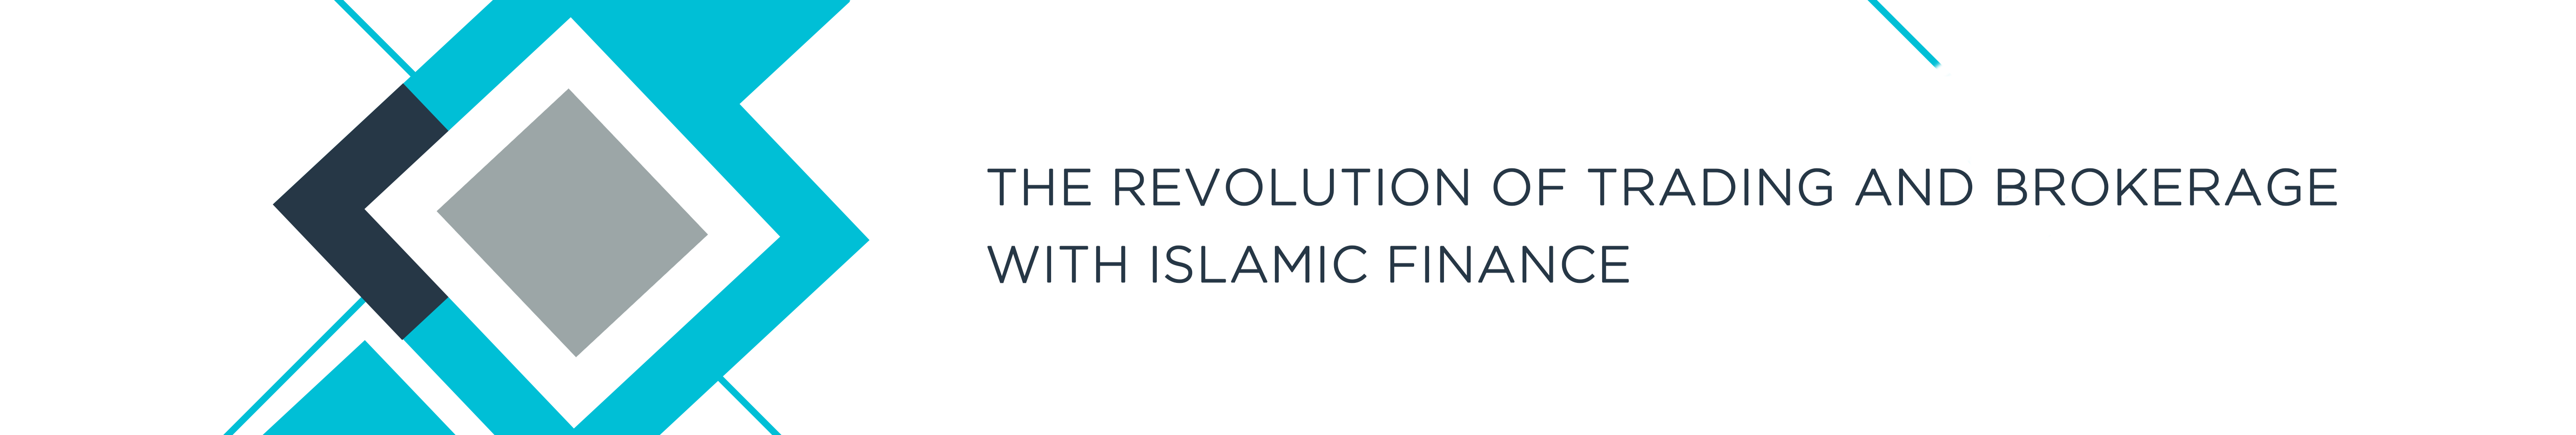 The Revolution of Trading and Brokerage with Islamic Finance